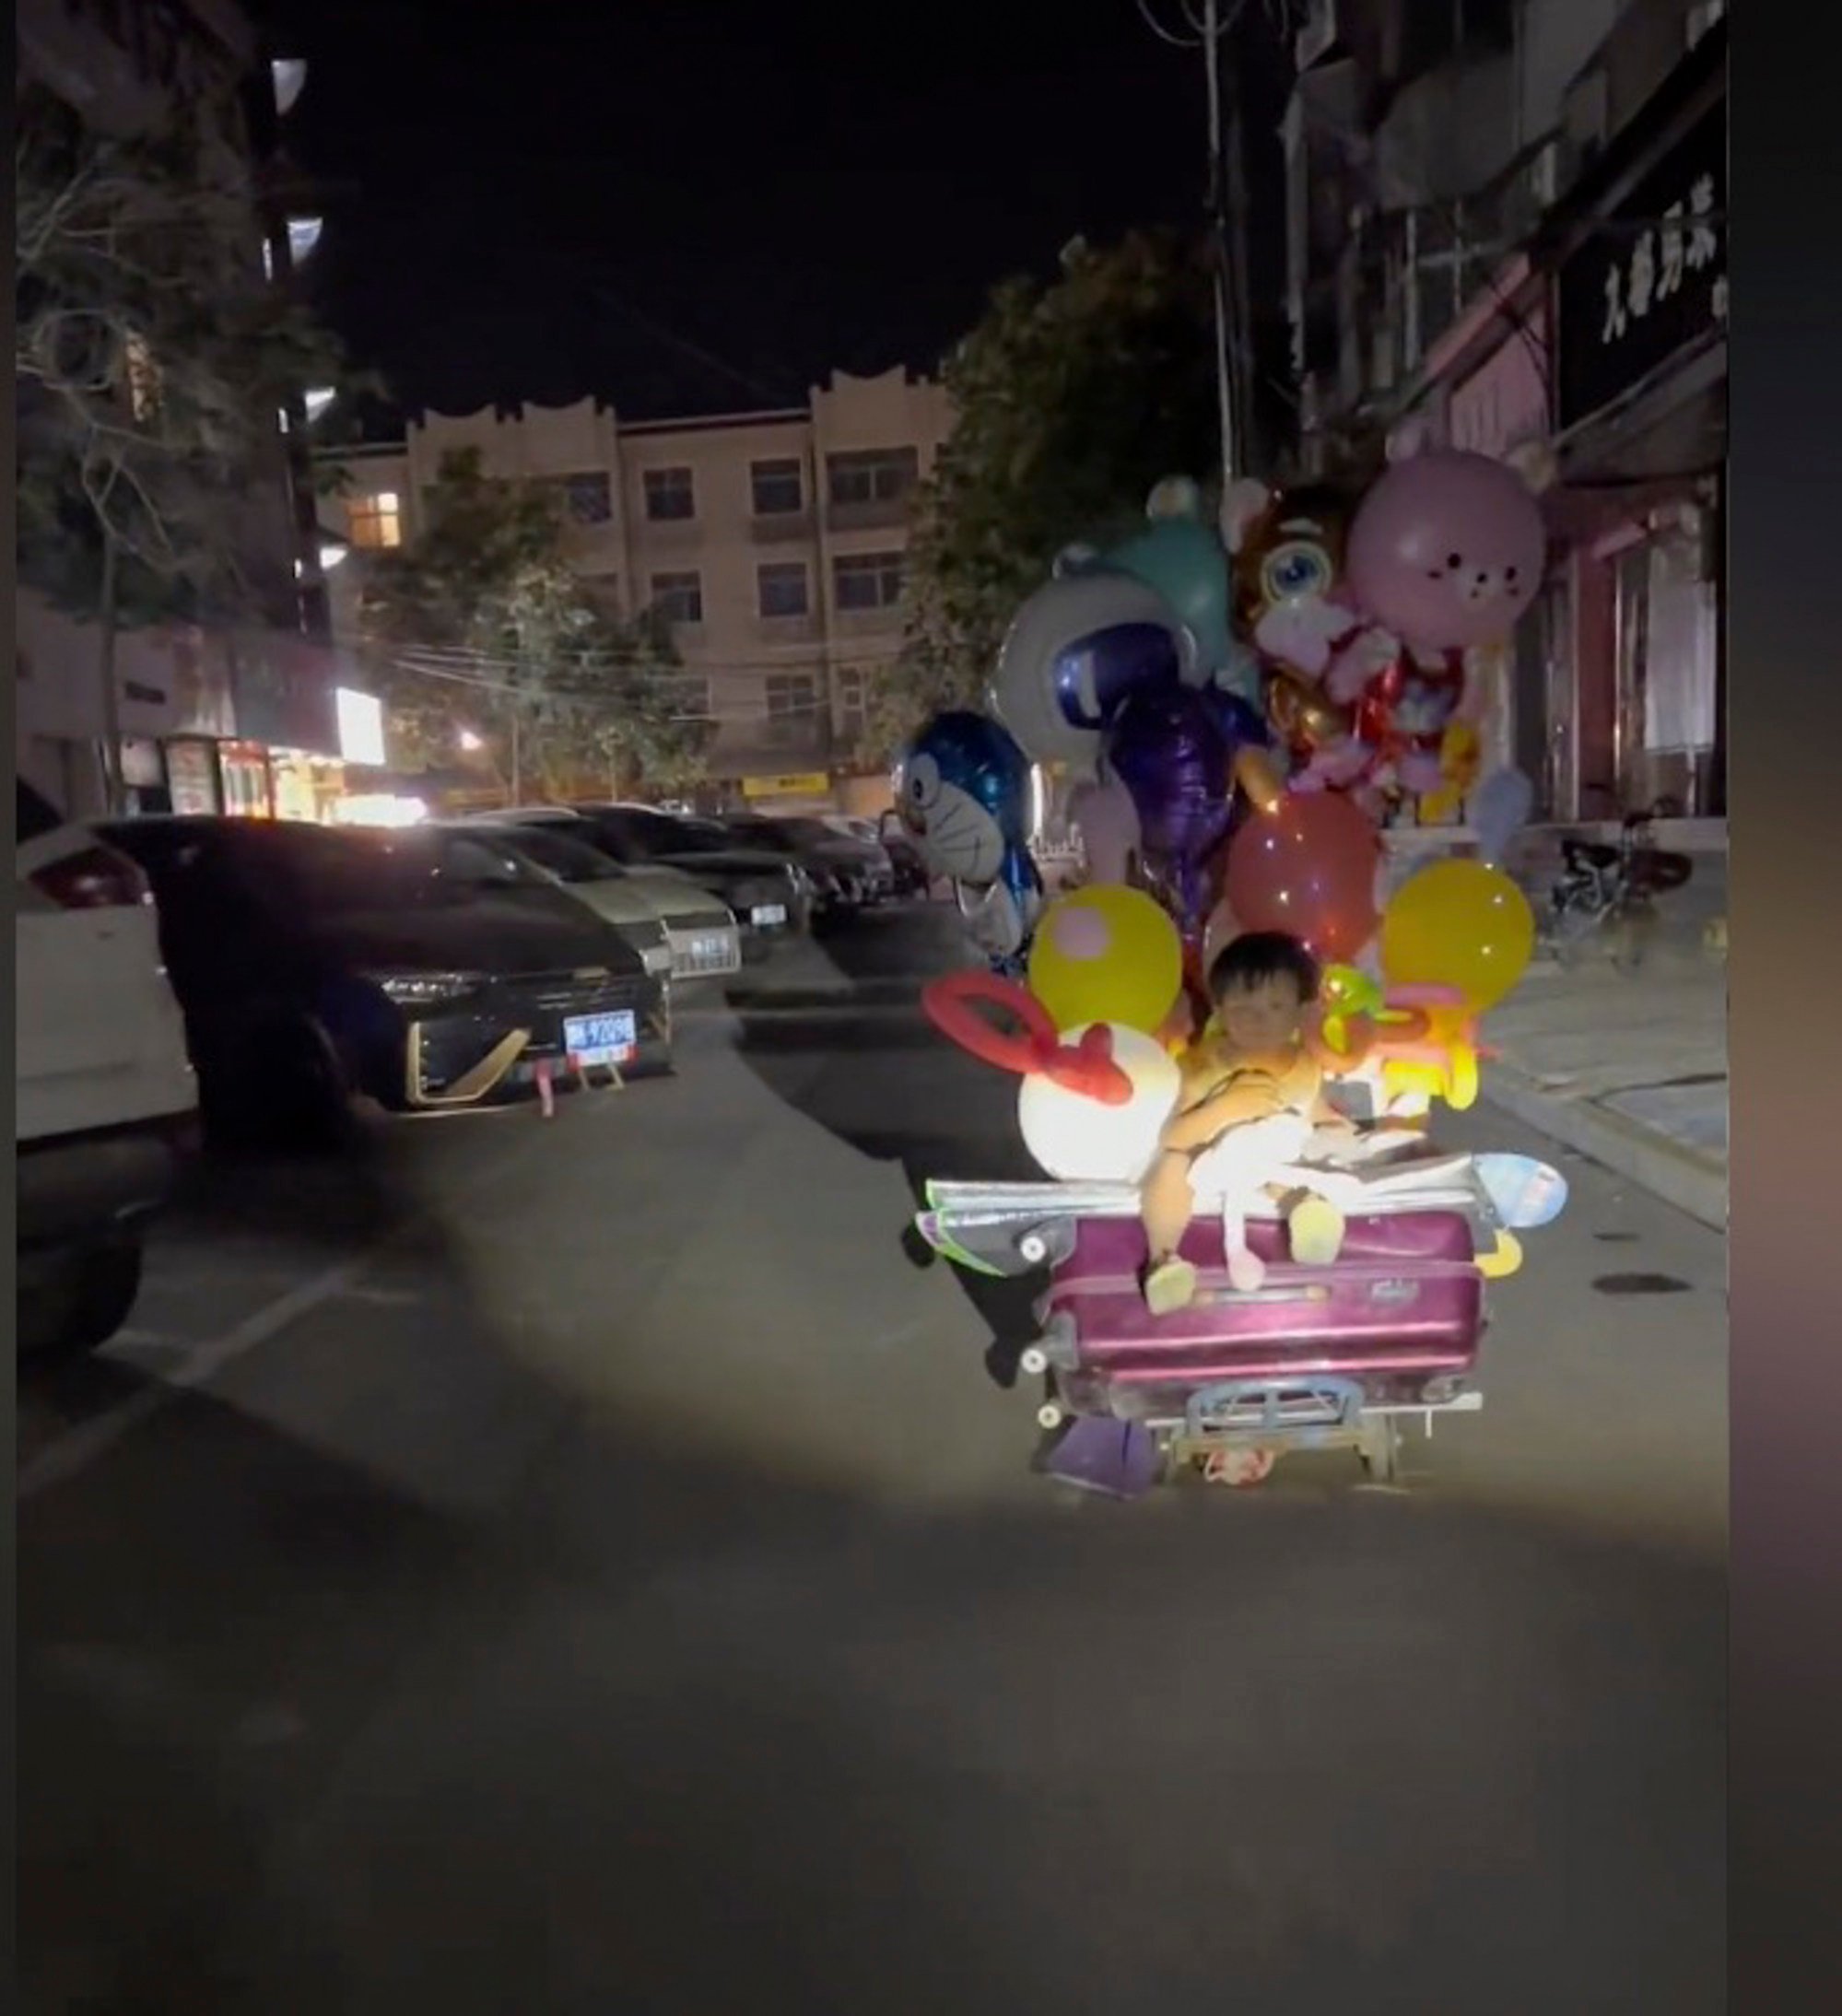 The unnamed little girl rides on top of her father’s luggage as he tries to sell balloons. Photo: Douyin